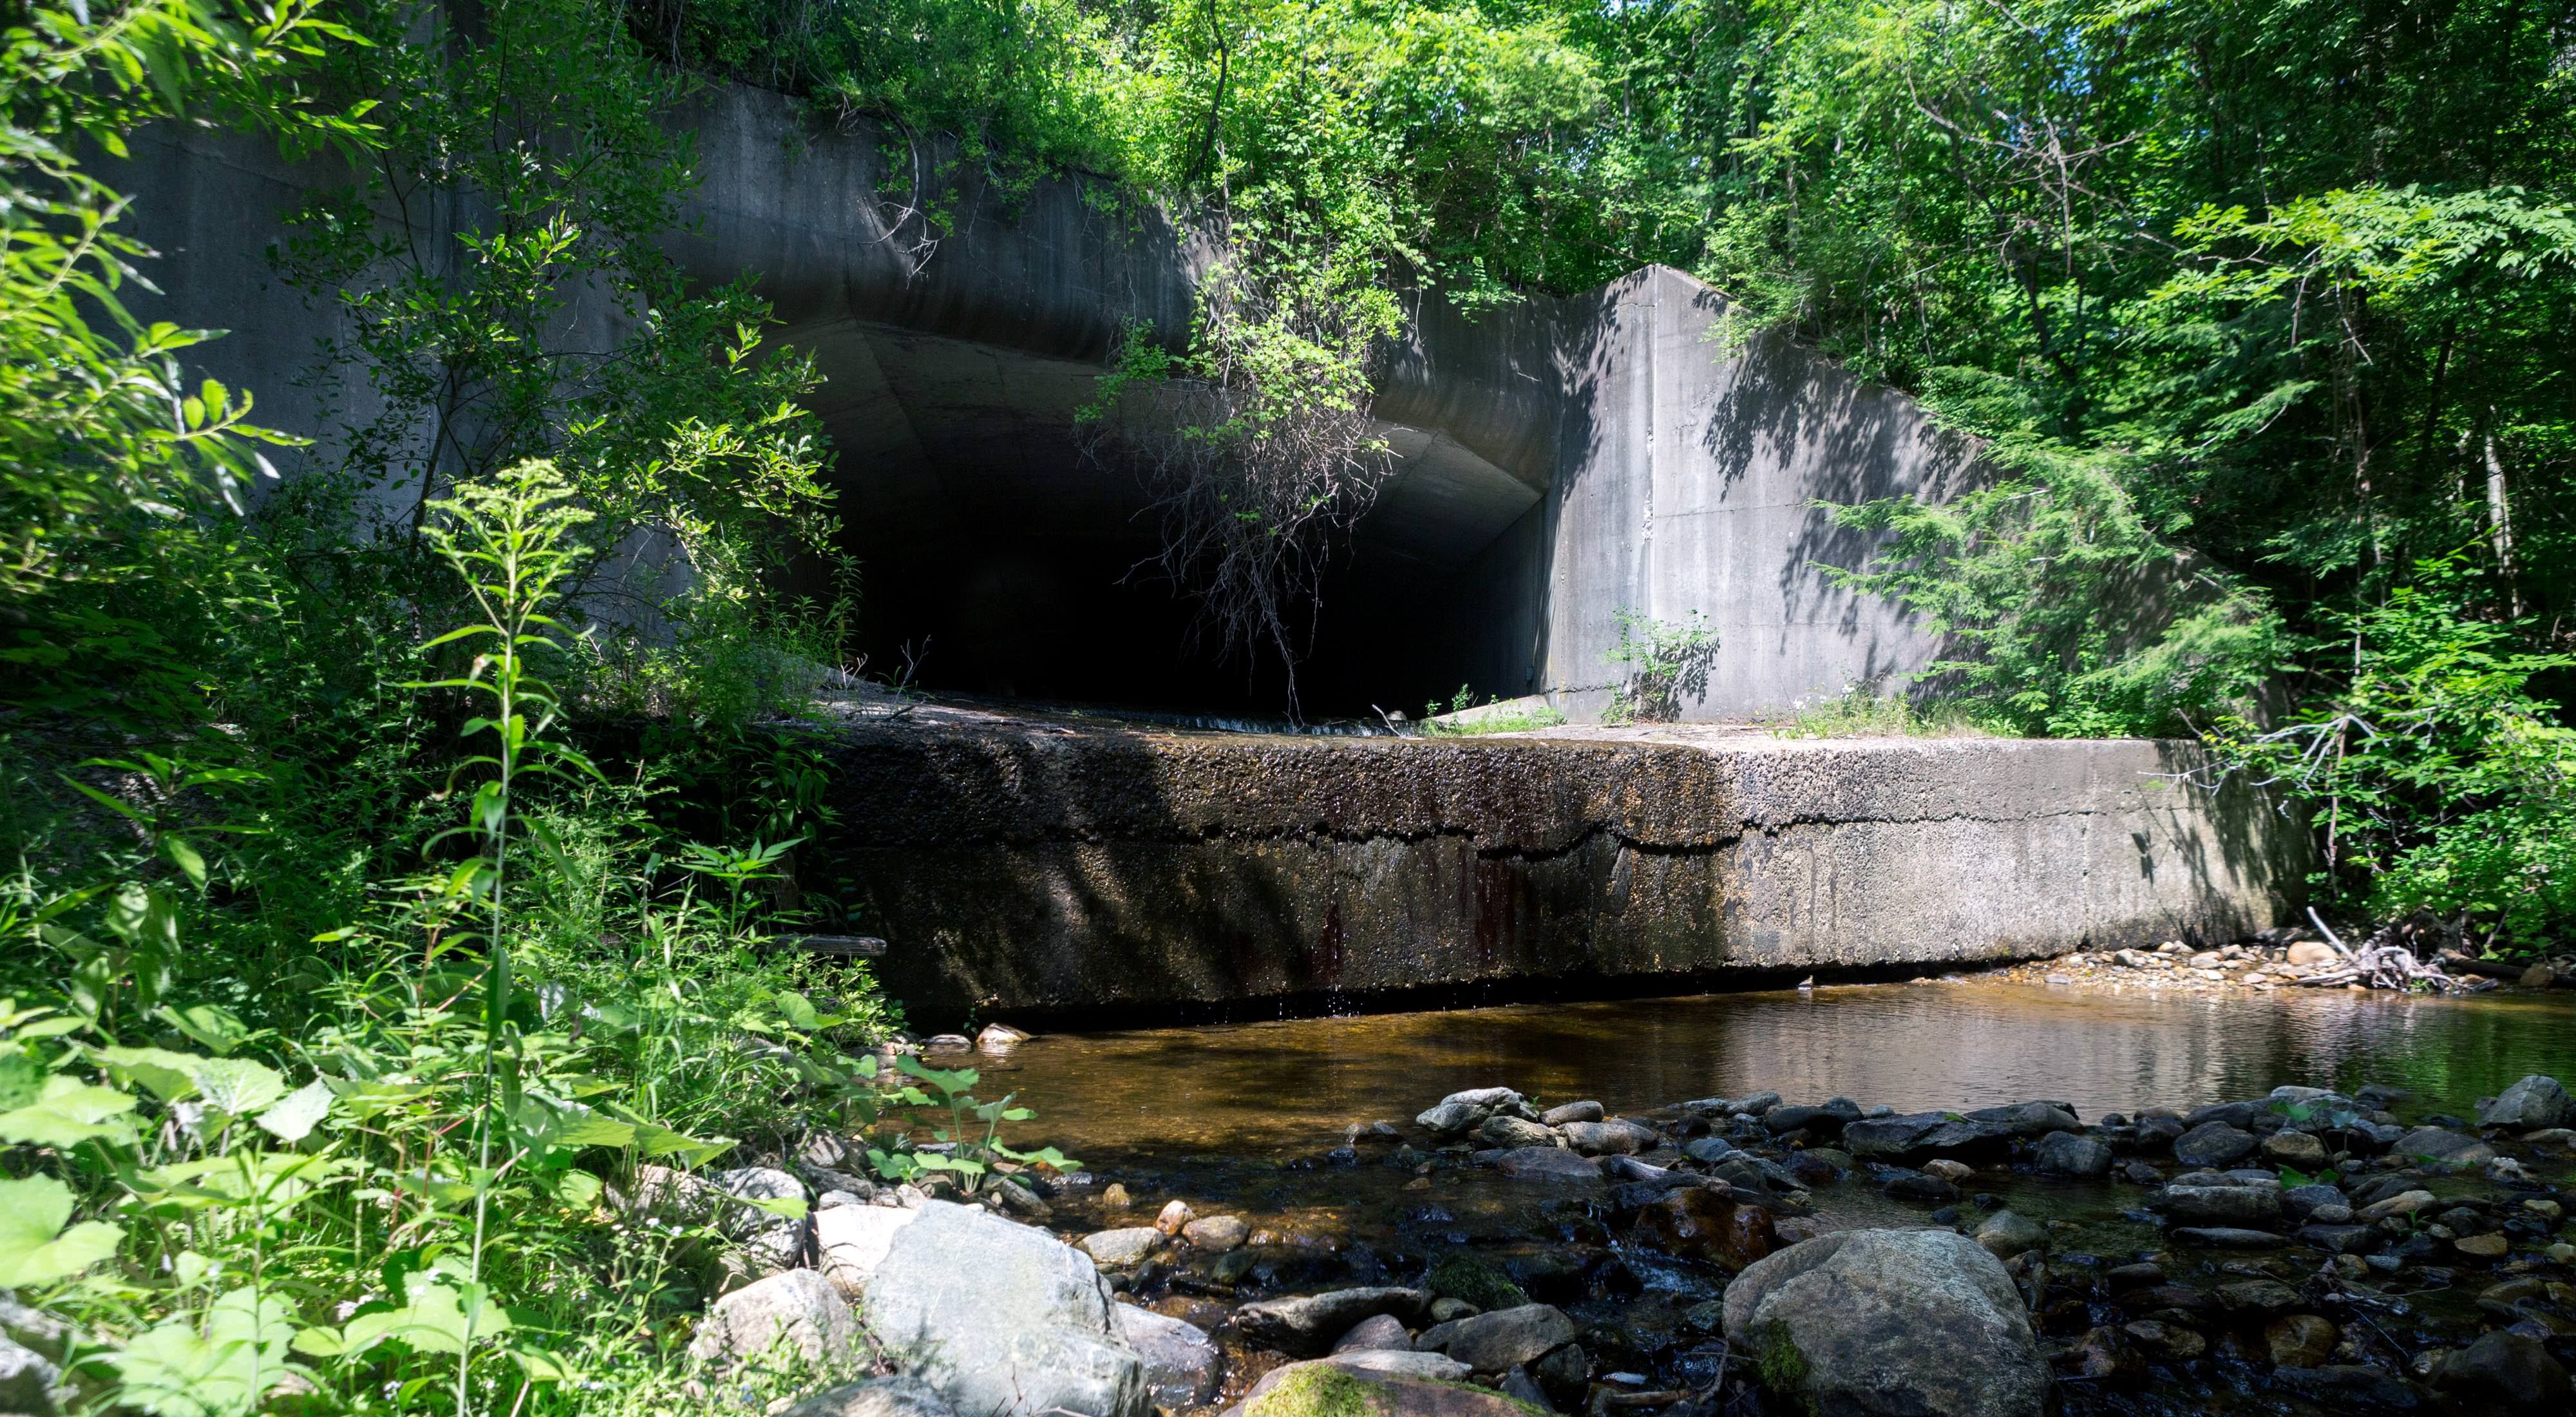 A large concrete culvert underneath Interstate 90 in Western Massachusetts, surrounded by trees and brush.